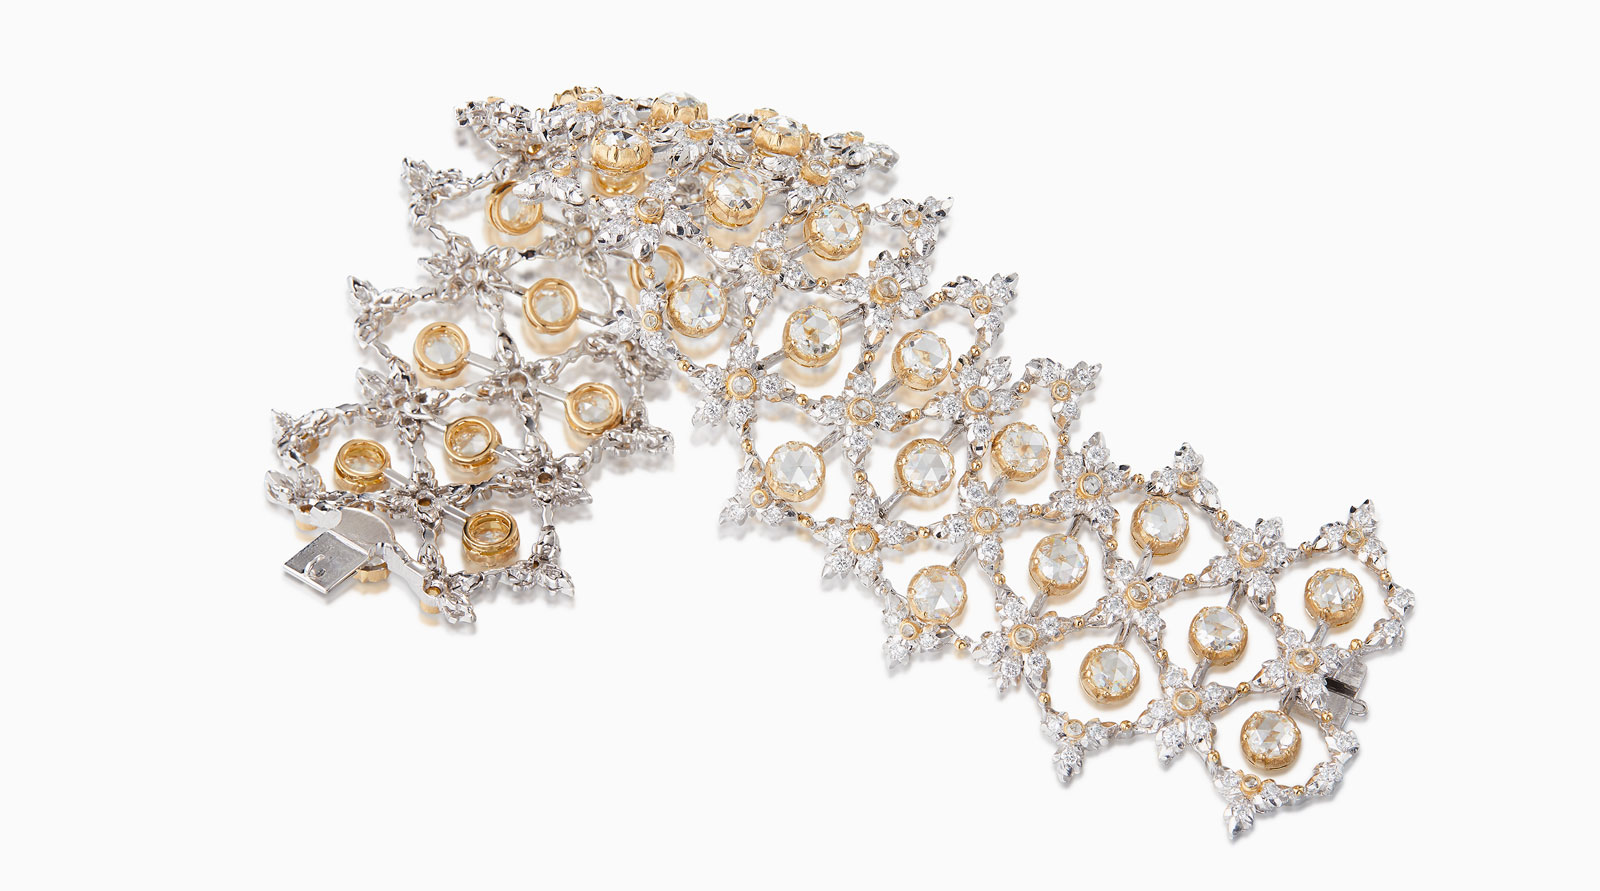 Buccellati's 2021 high jewellery collection launches